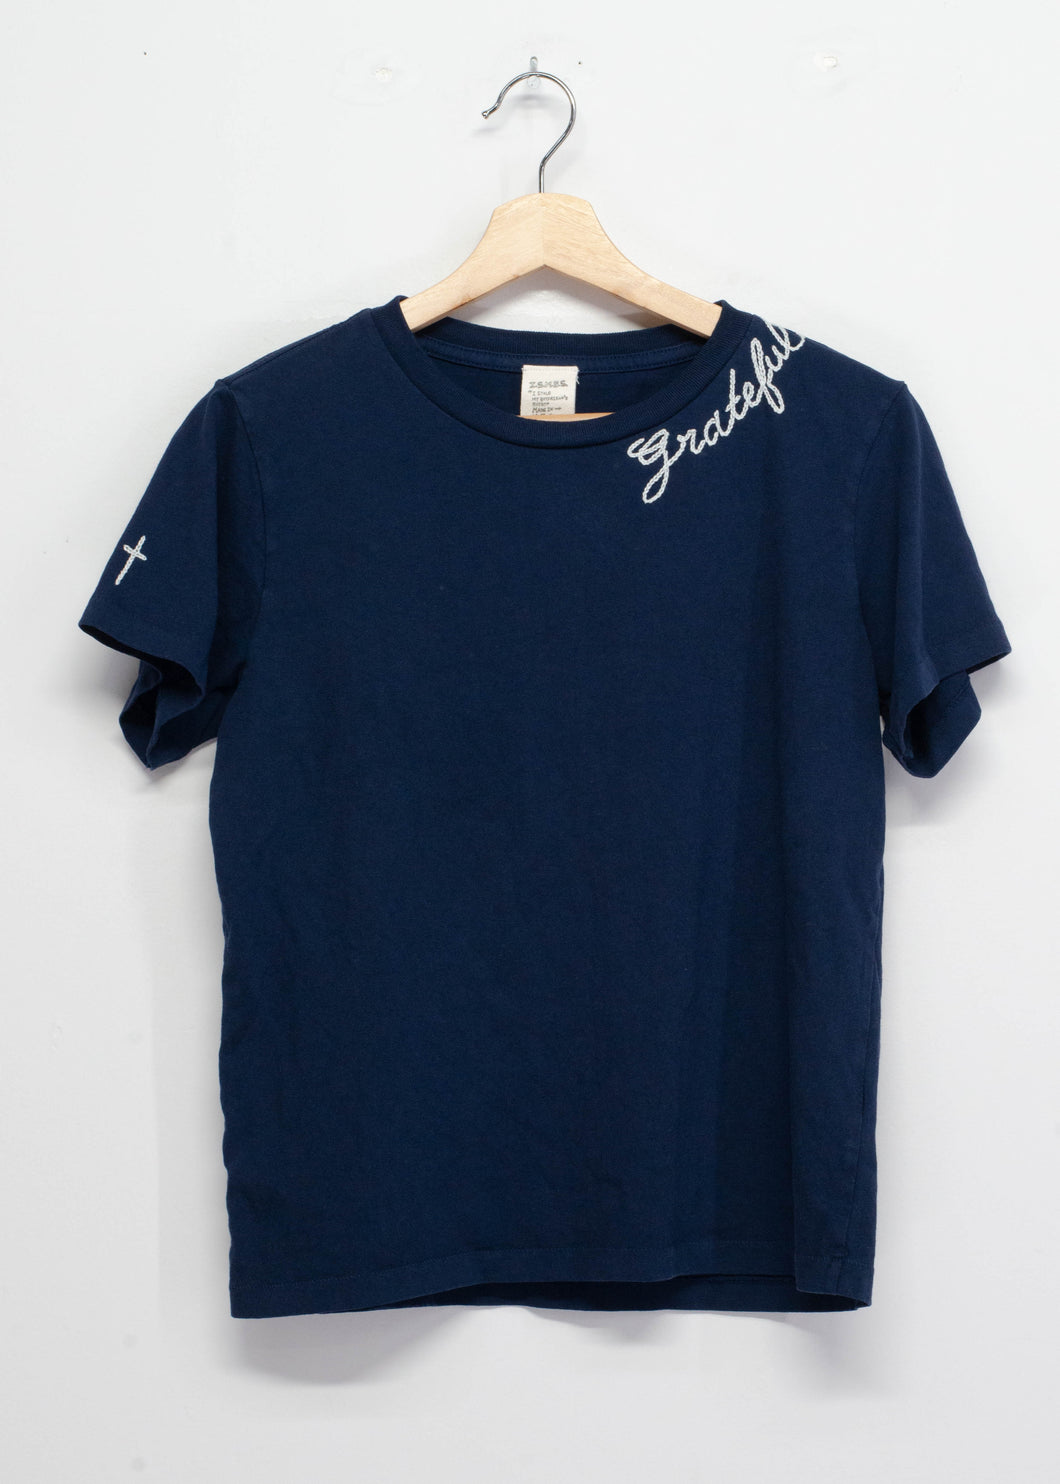 Grateful 23 S/S TEE WITH CUSTOM HAND EMBROIDERY (6 Colors)